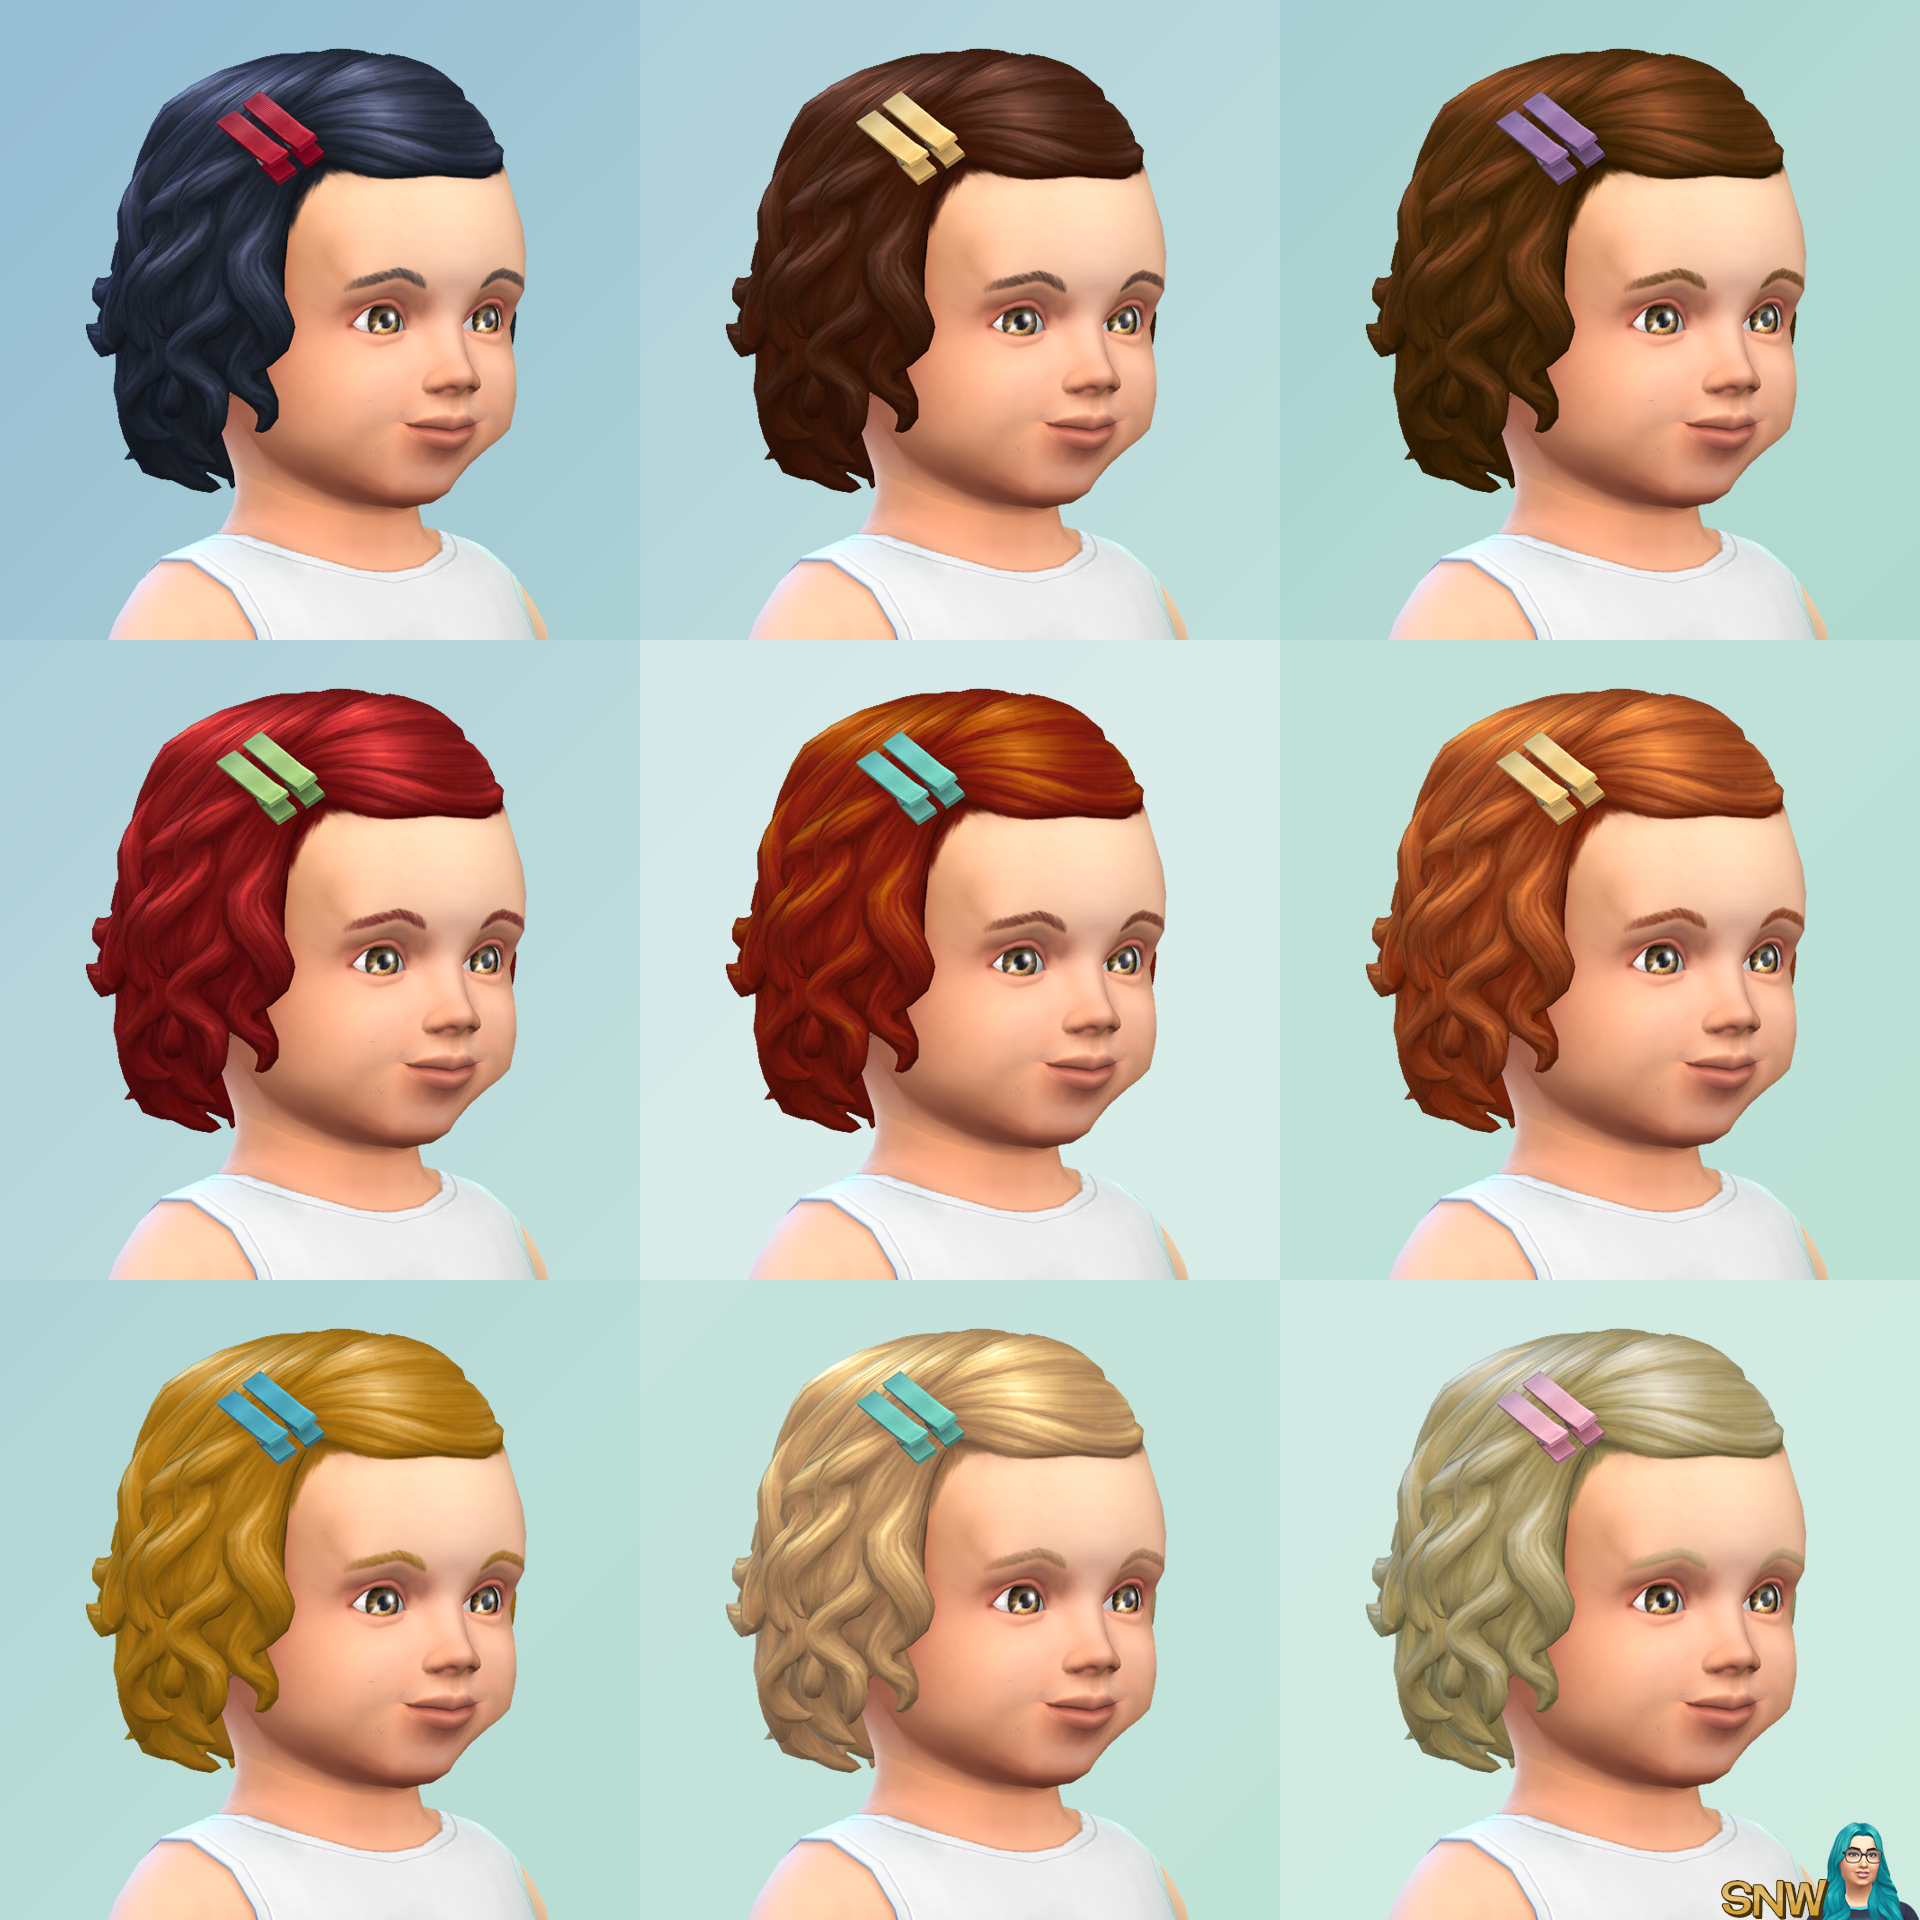 The Sims 4: Toddler Stuff - CAS Overview, SNW